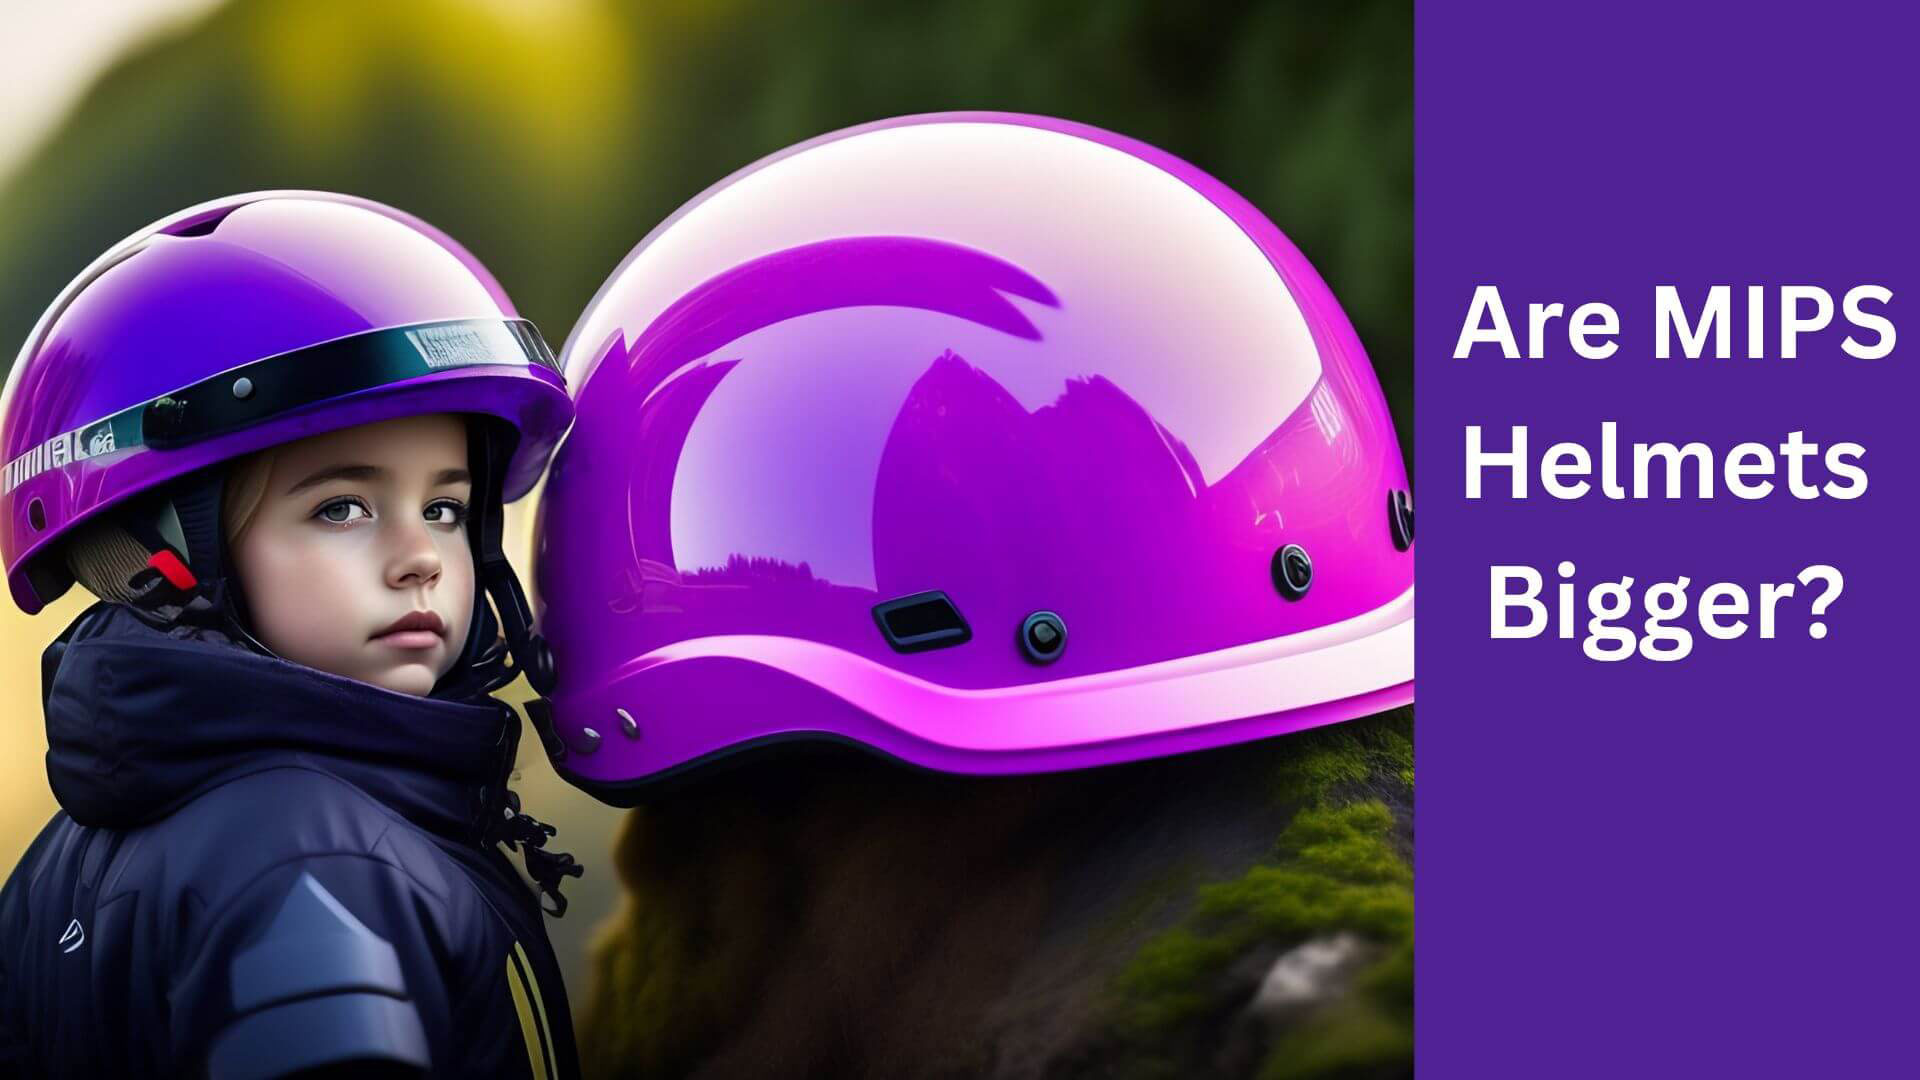 Are MIPS Helmets Bigger and Safer Than Helmets?